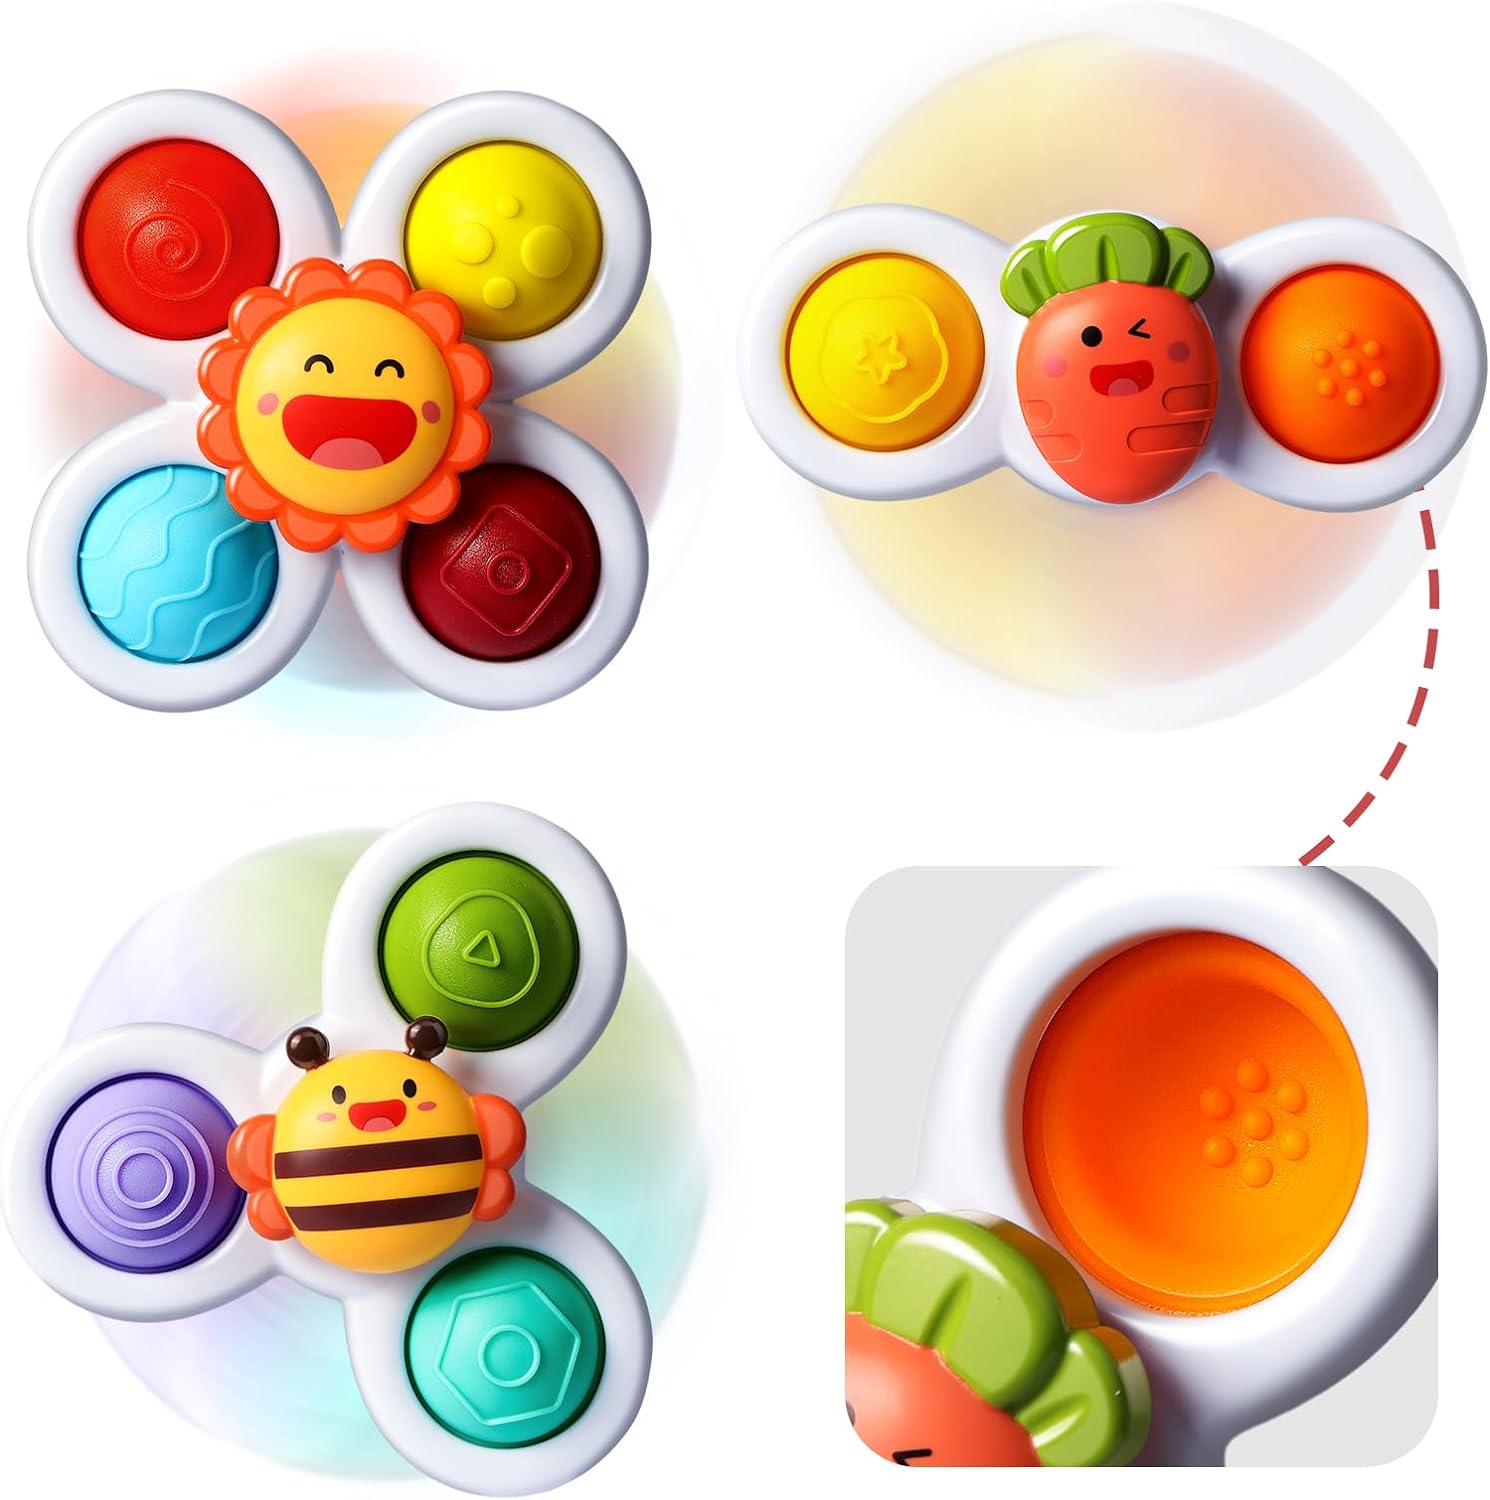 3PCS ALASOU Pop up Suction Cup Spinner Toys for Baby Christmas Stocking Stuffers Gifts|Novelty Spinning Tops Bath Toys for Kids Ages 1-3|Sensory Toys for Toddlers 1-3 Year Old Boy Birthday Gift